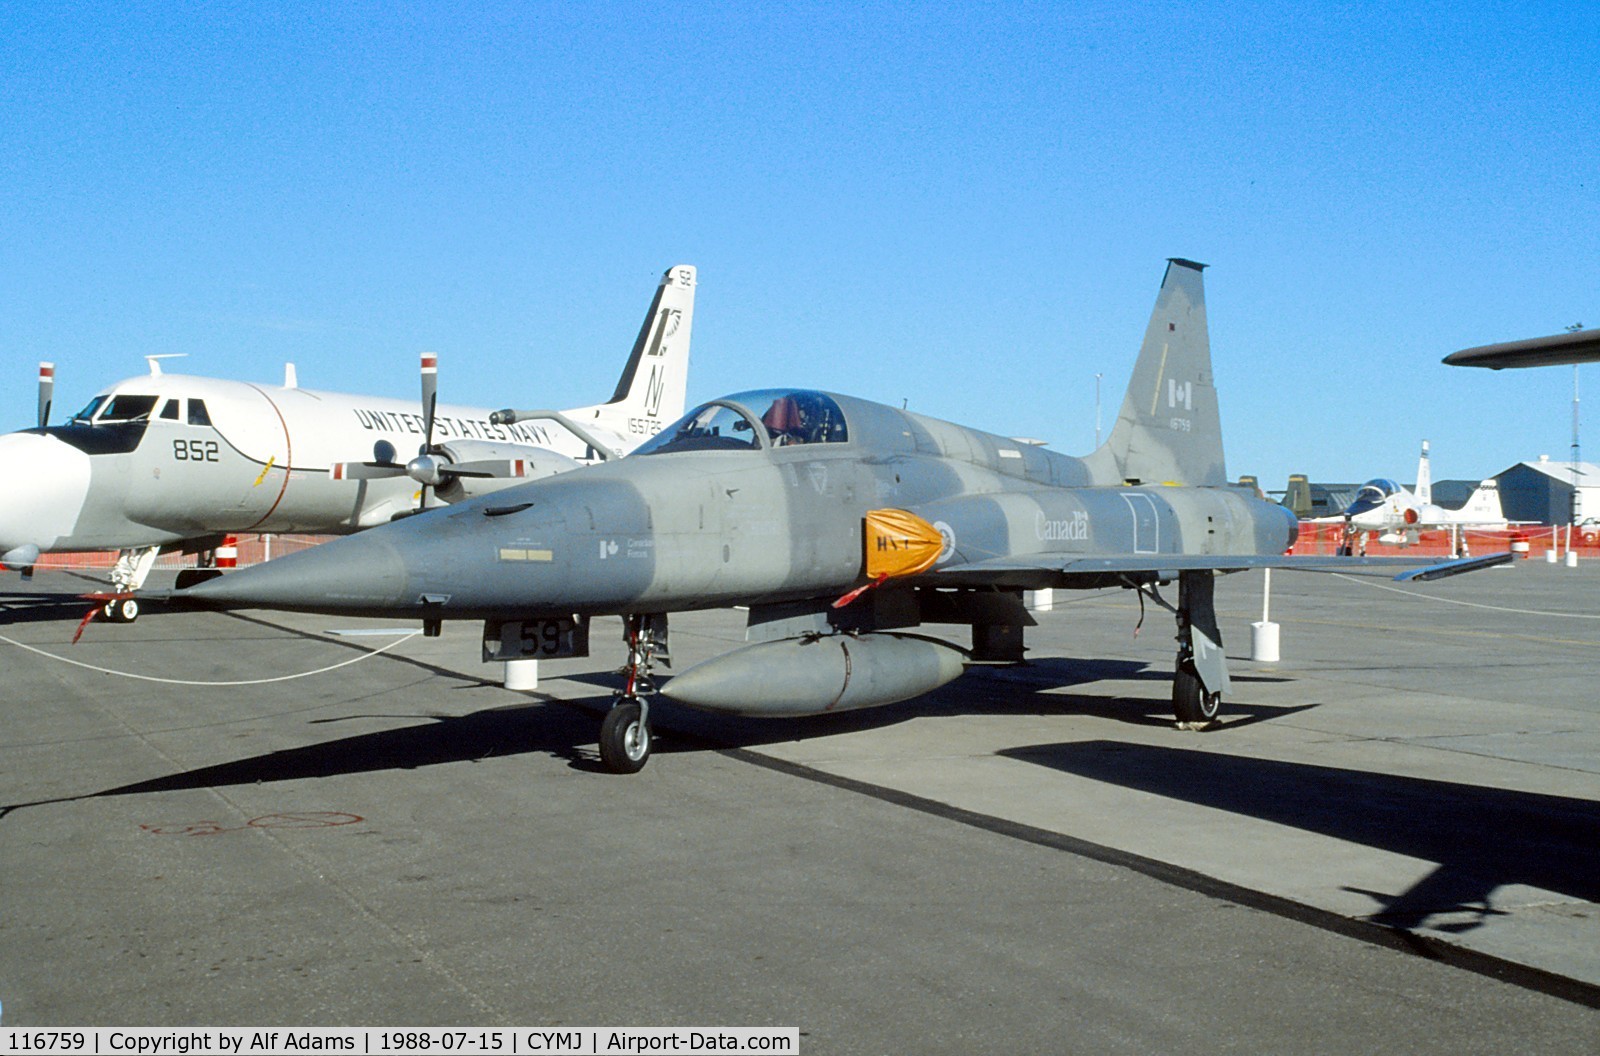 116759, Canadair CF-5A C/N 1059, CF-5 116759 on display at the annual airshow at Canadian Forces Base Moose Jaw, Saskatchewan, Canada in 1988.